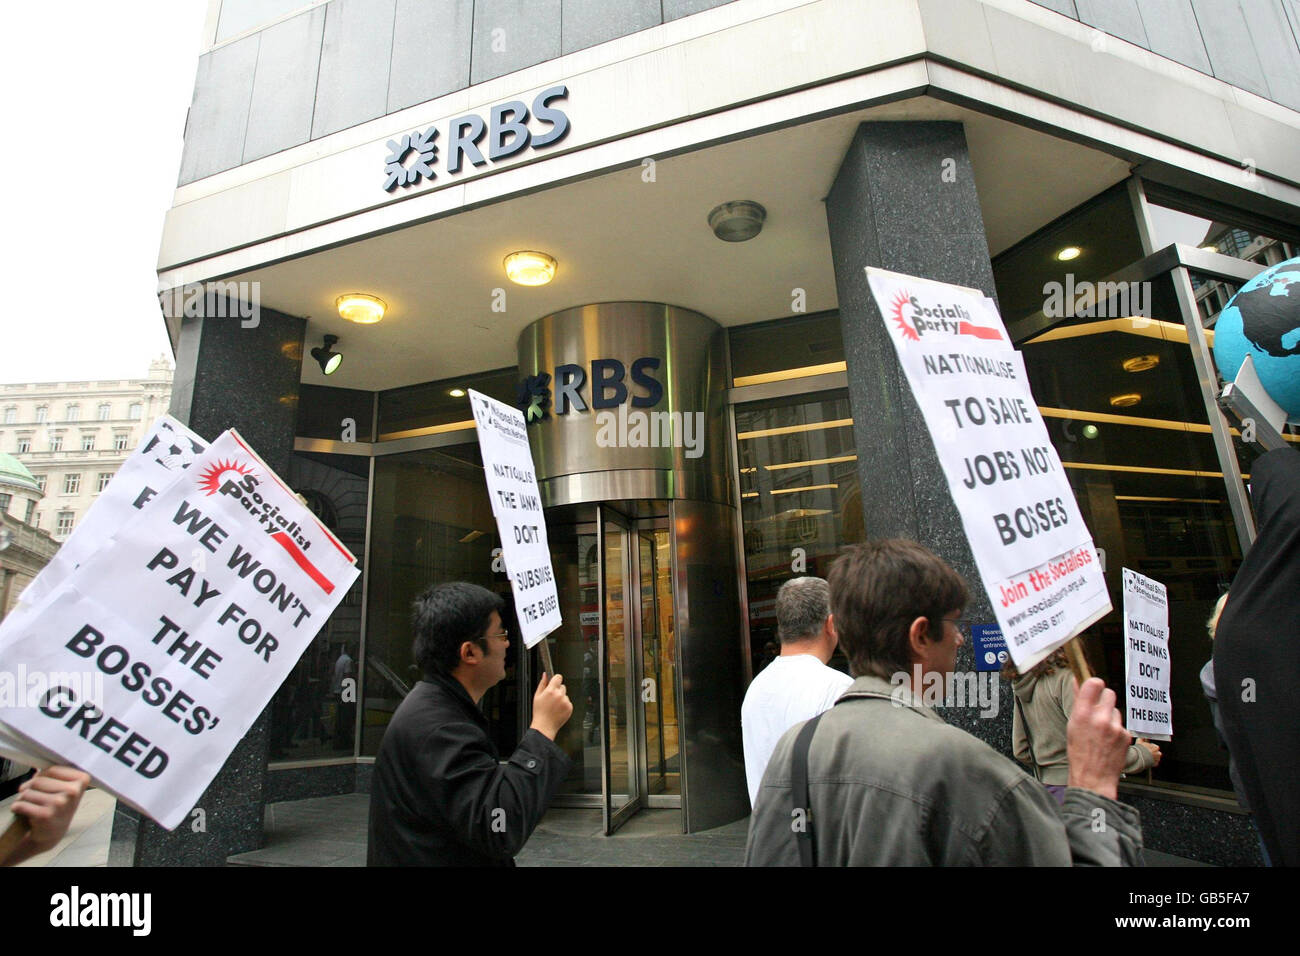 Protesters, who are unhappy at the government bailing out banks with taxpayers' money, take part in a demonstration outside a Royal Bank of Scotland building in London. Stock Photo